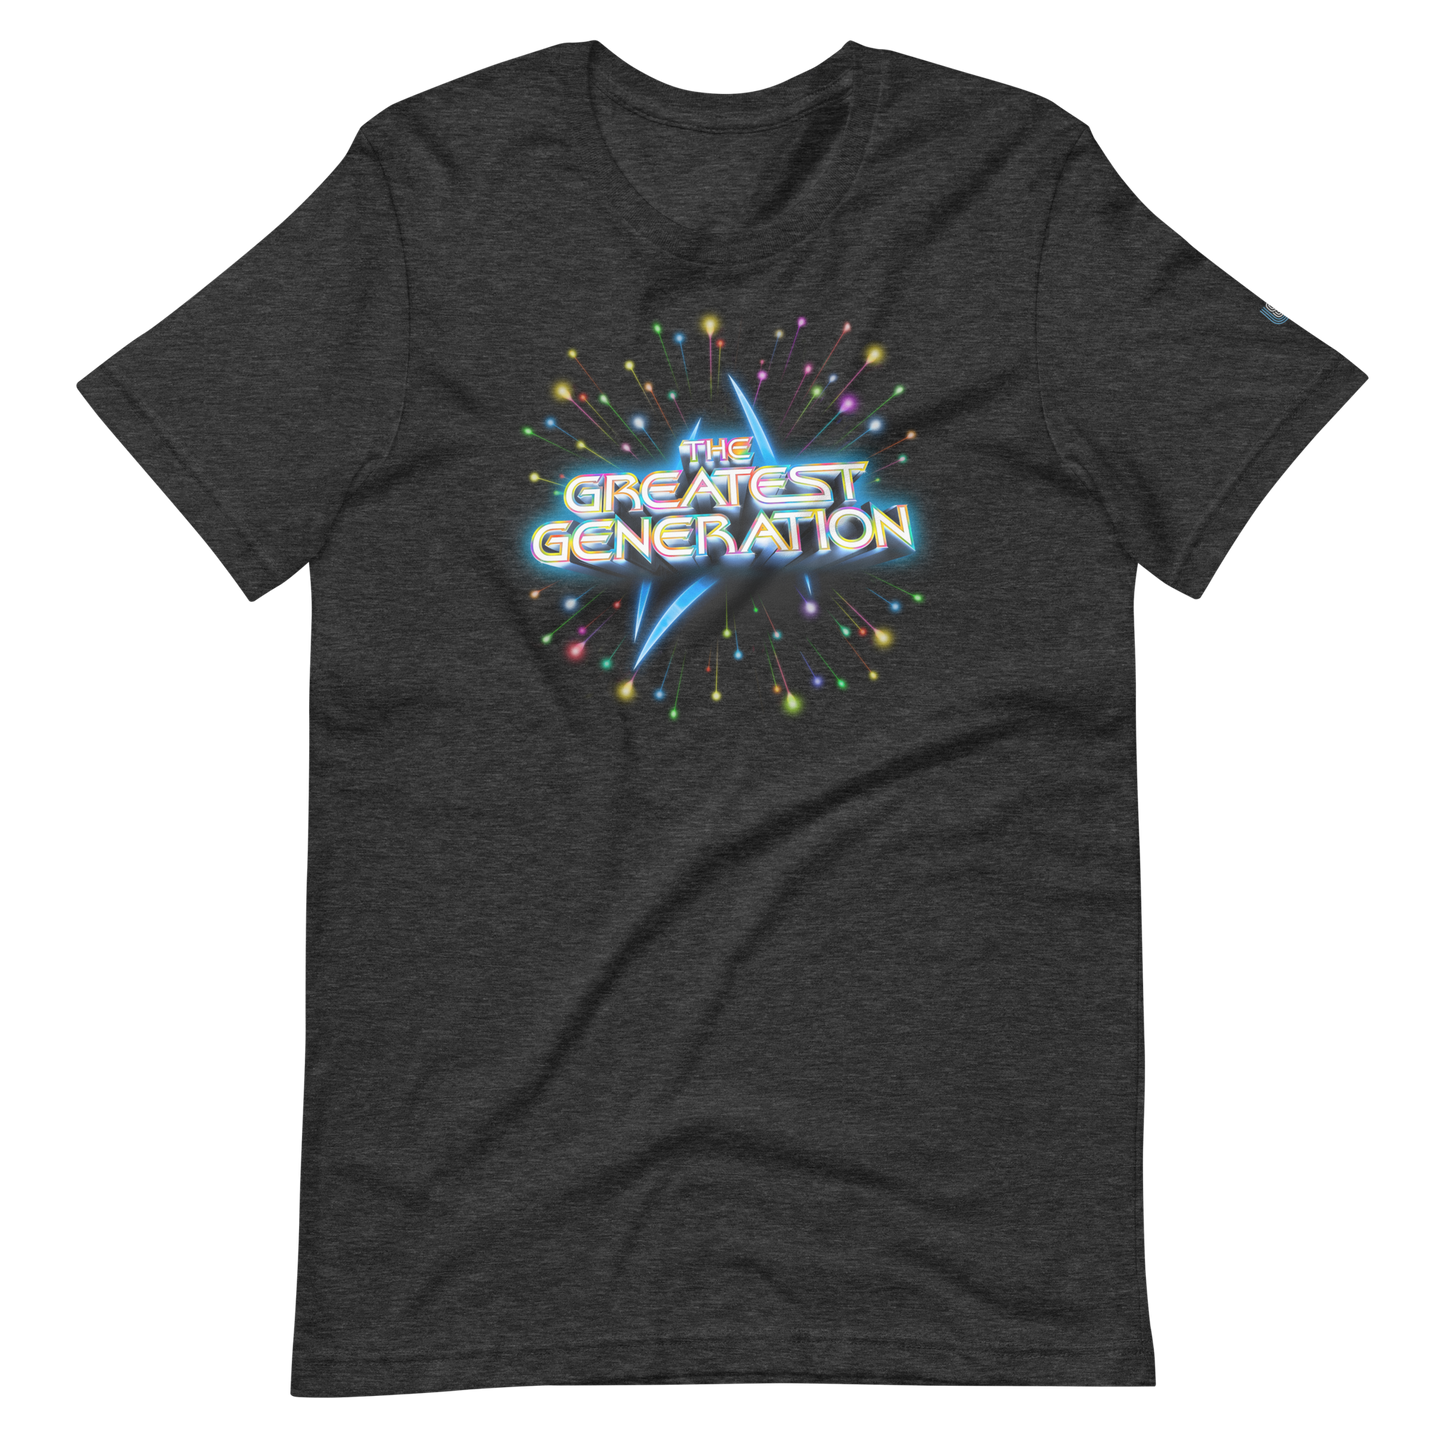 The Greatest Generation T-Shirt